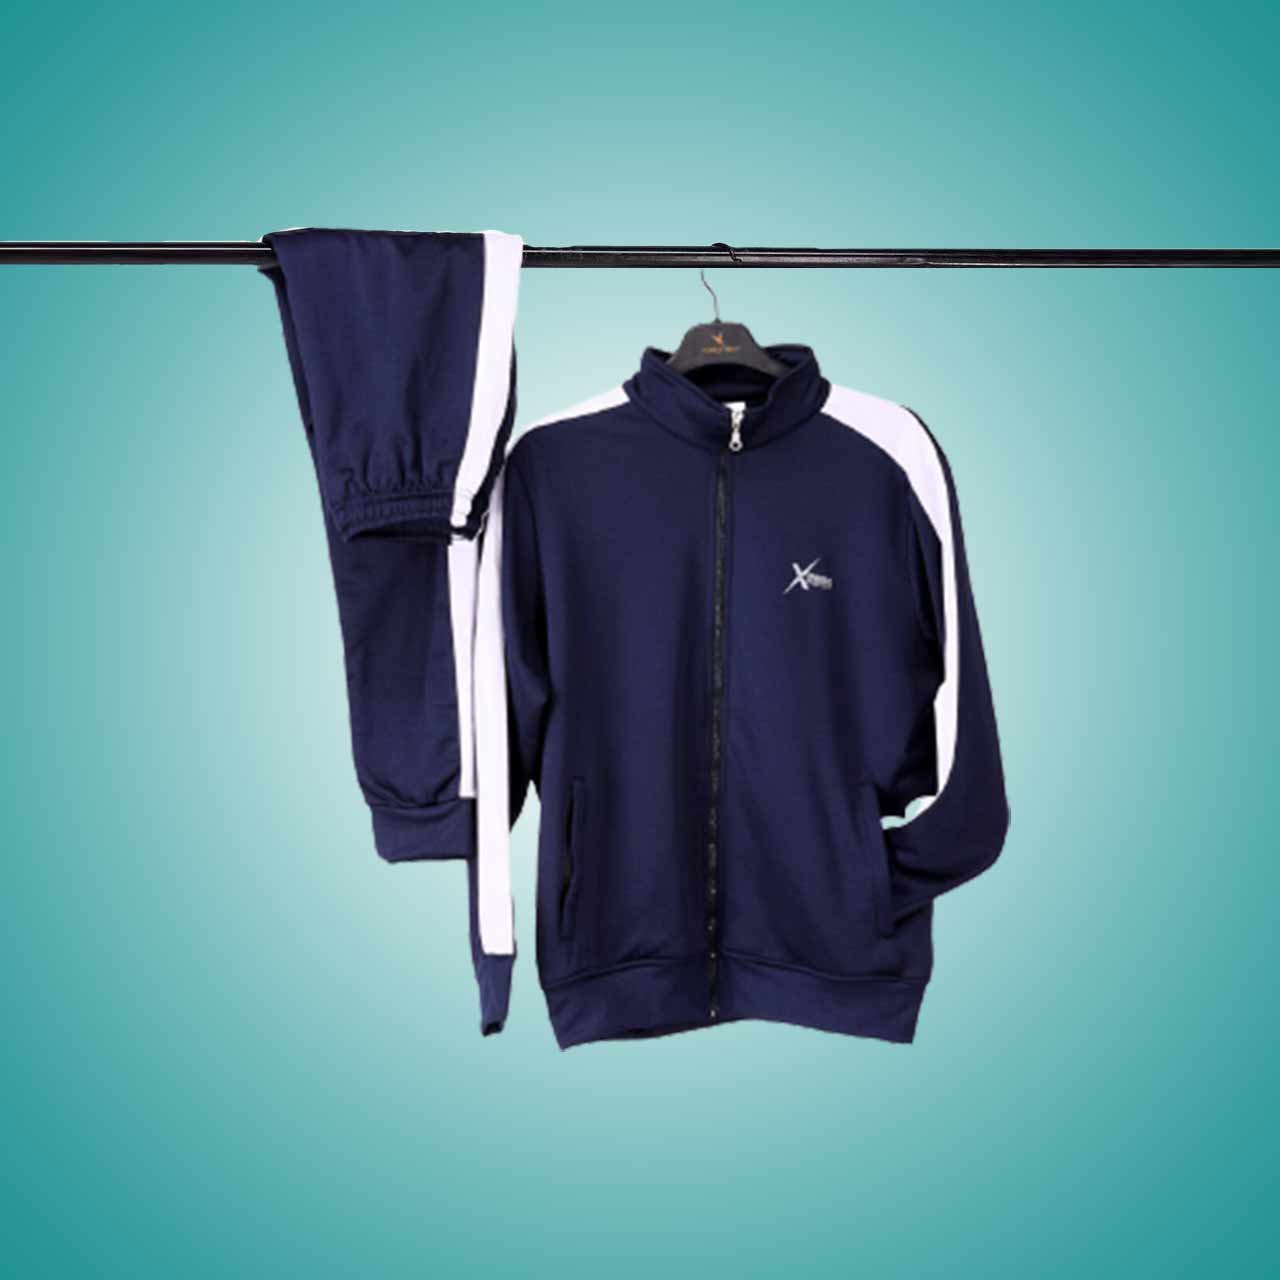 Showing navy tracksuit for men in blue colour with white stripe with xtreme sport logo